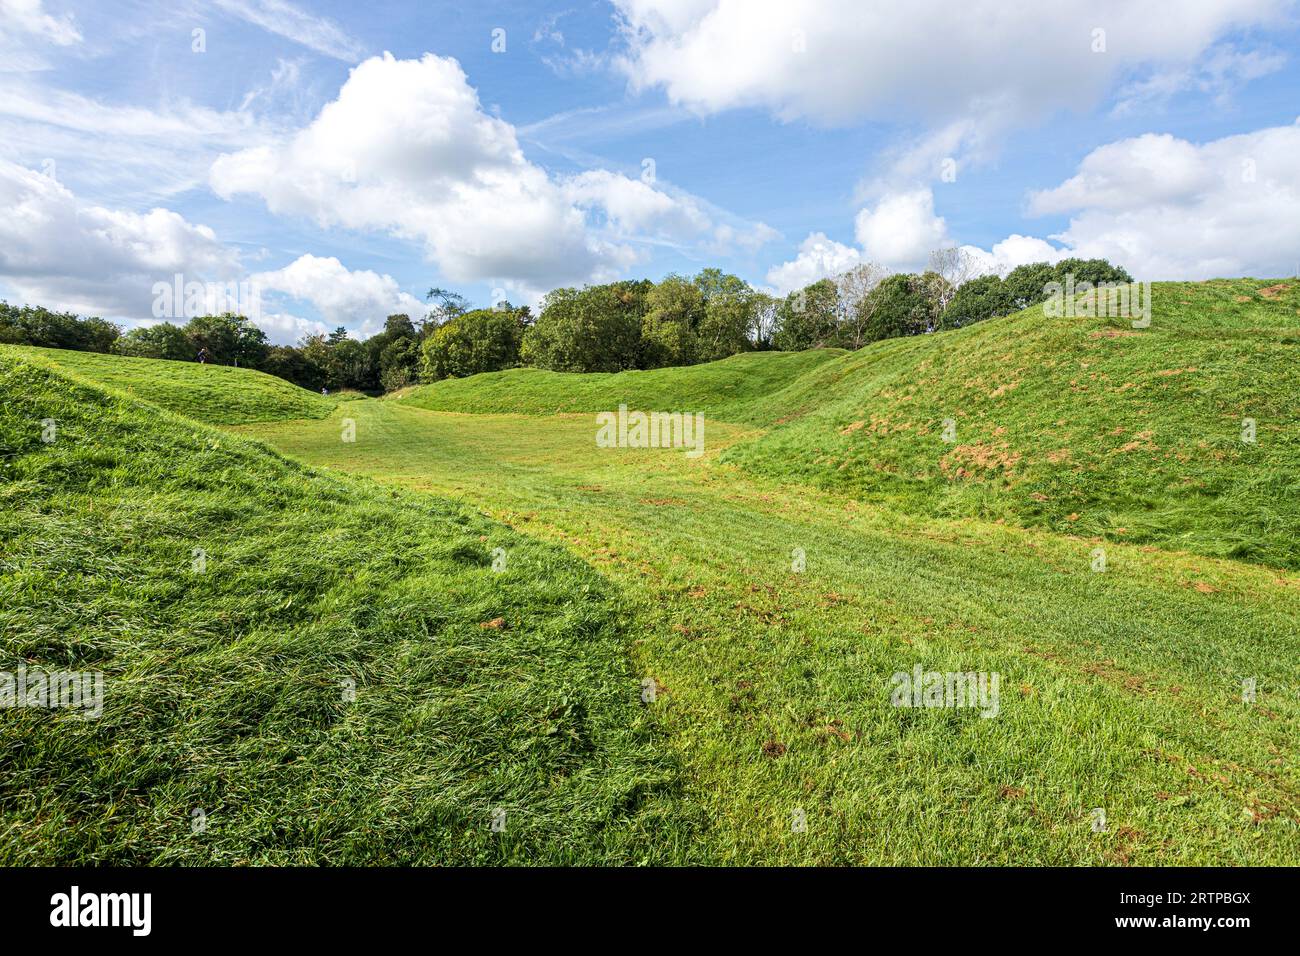 The early 2nd century AD Roman amphitheatre on the outskirts of Corinium, now the Cotswold town of Cirencester, Gloucestershire, England UK Stock Photo